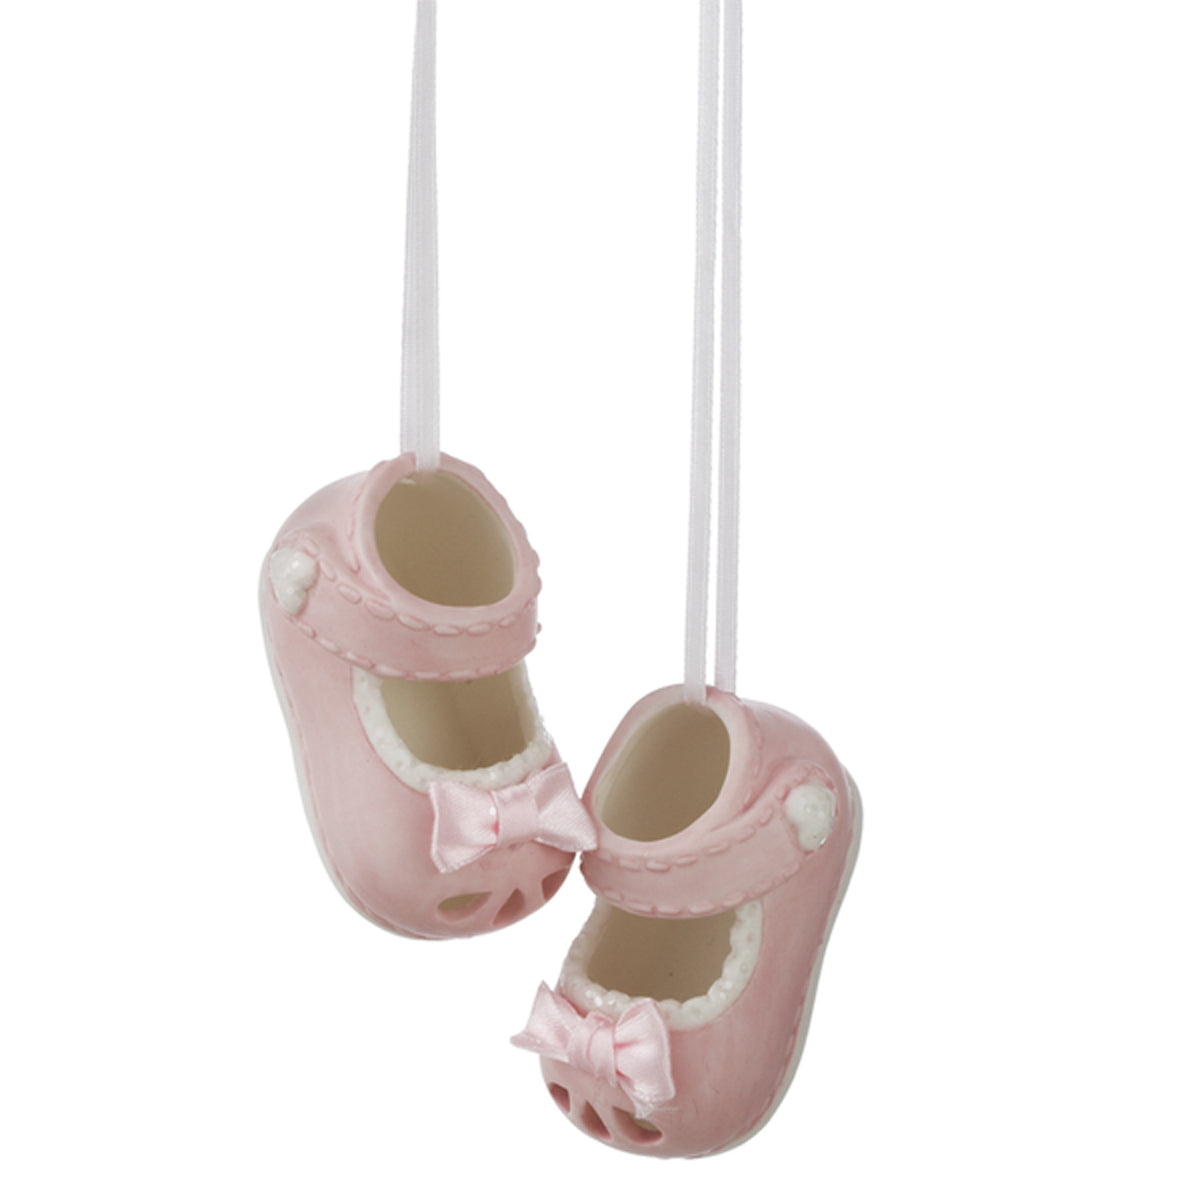 Baby Girl's Shoes Christmas Ornament, Personalizable, Set of 2